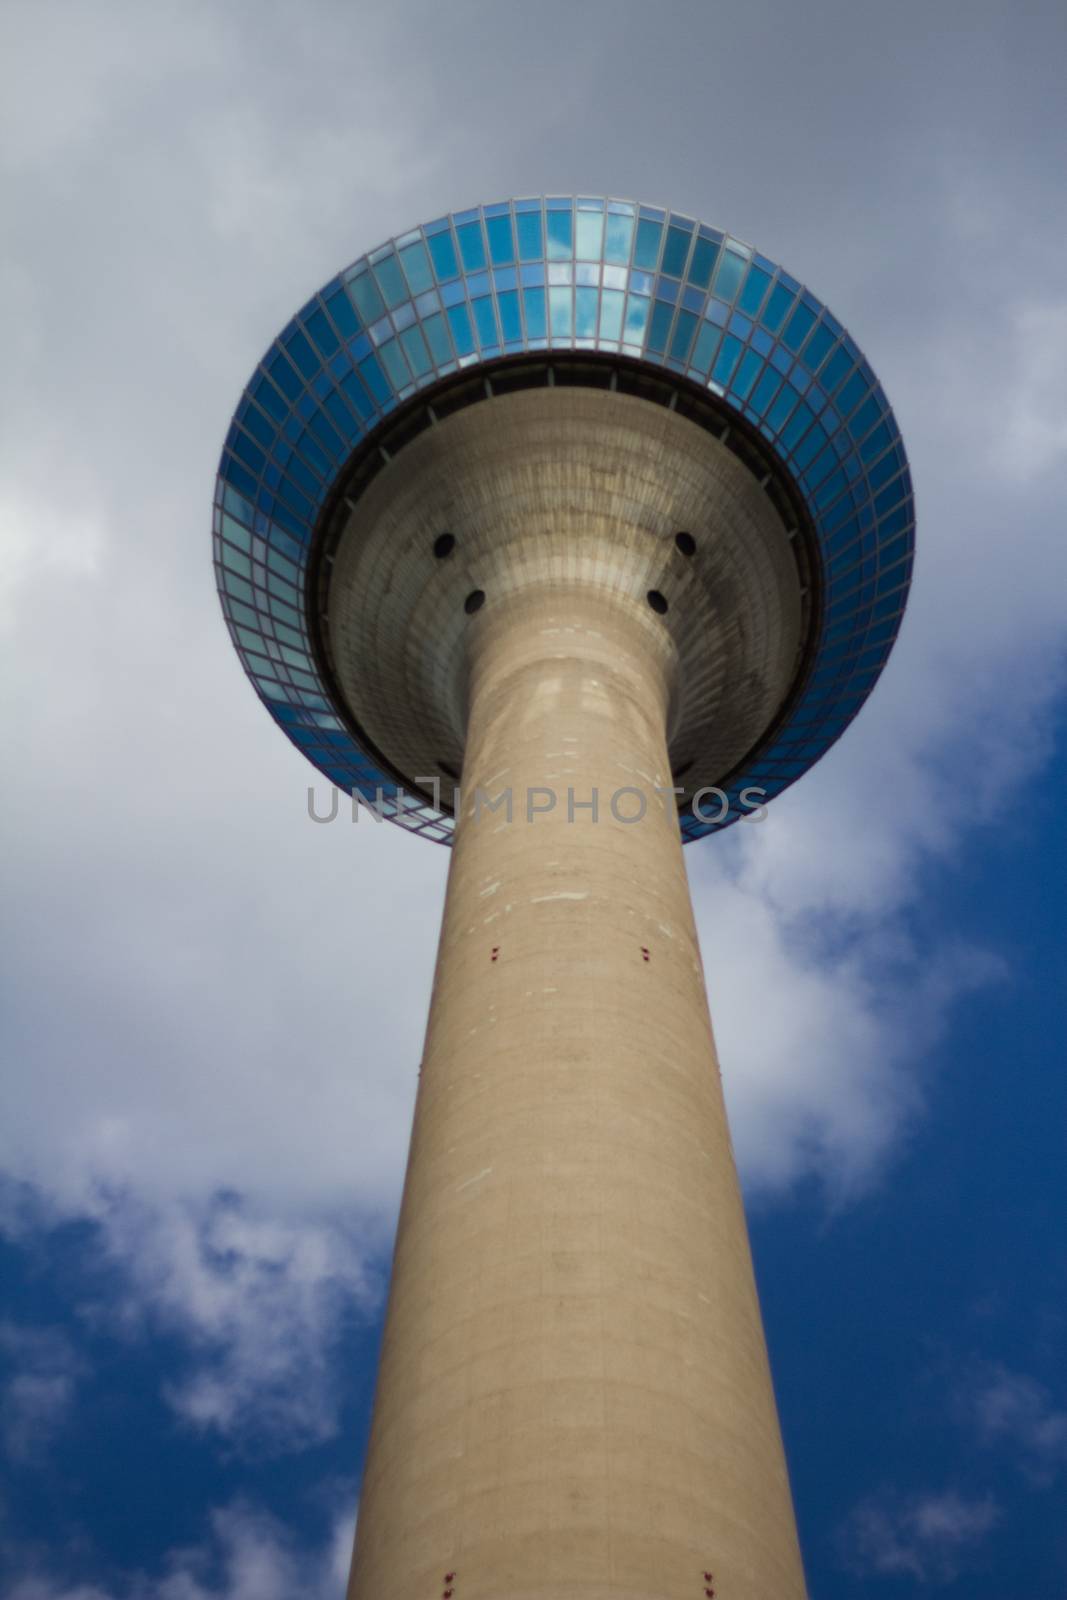 A Sky Tower in Germany by samULvisuals